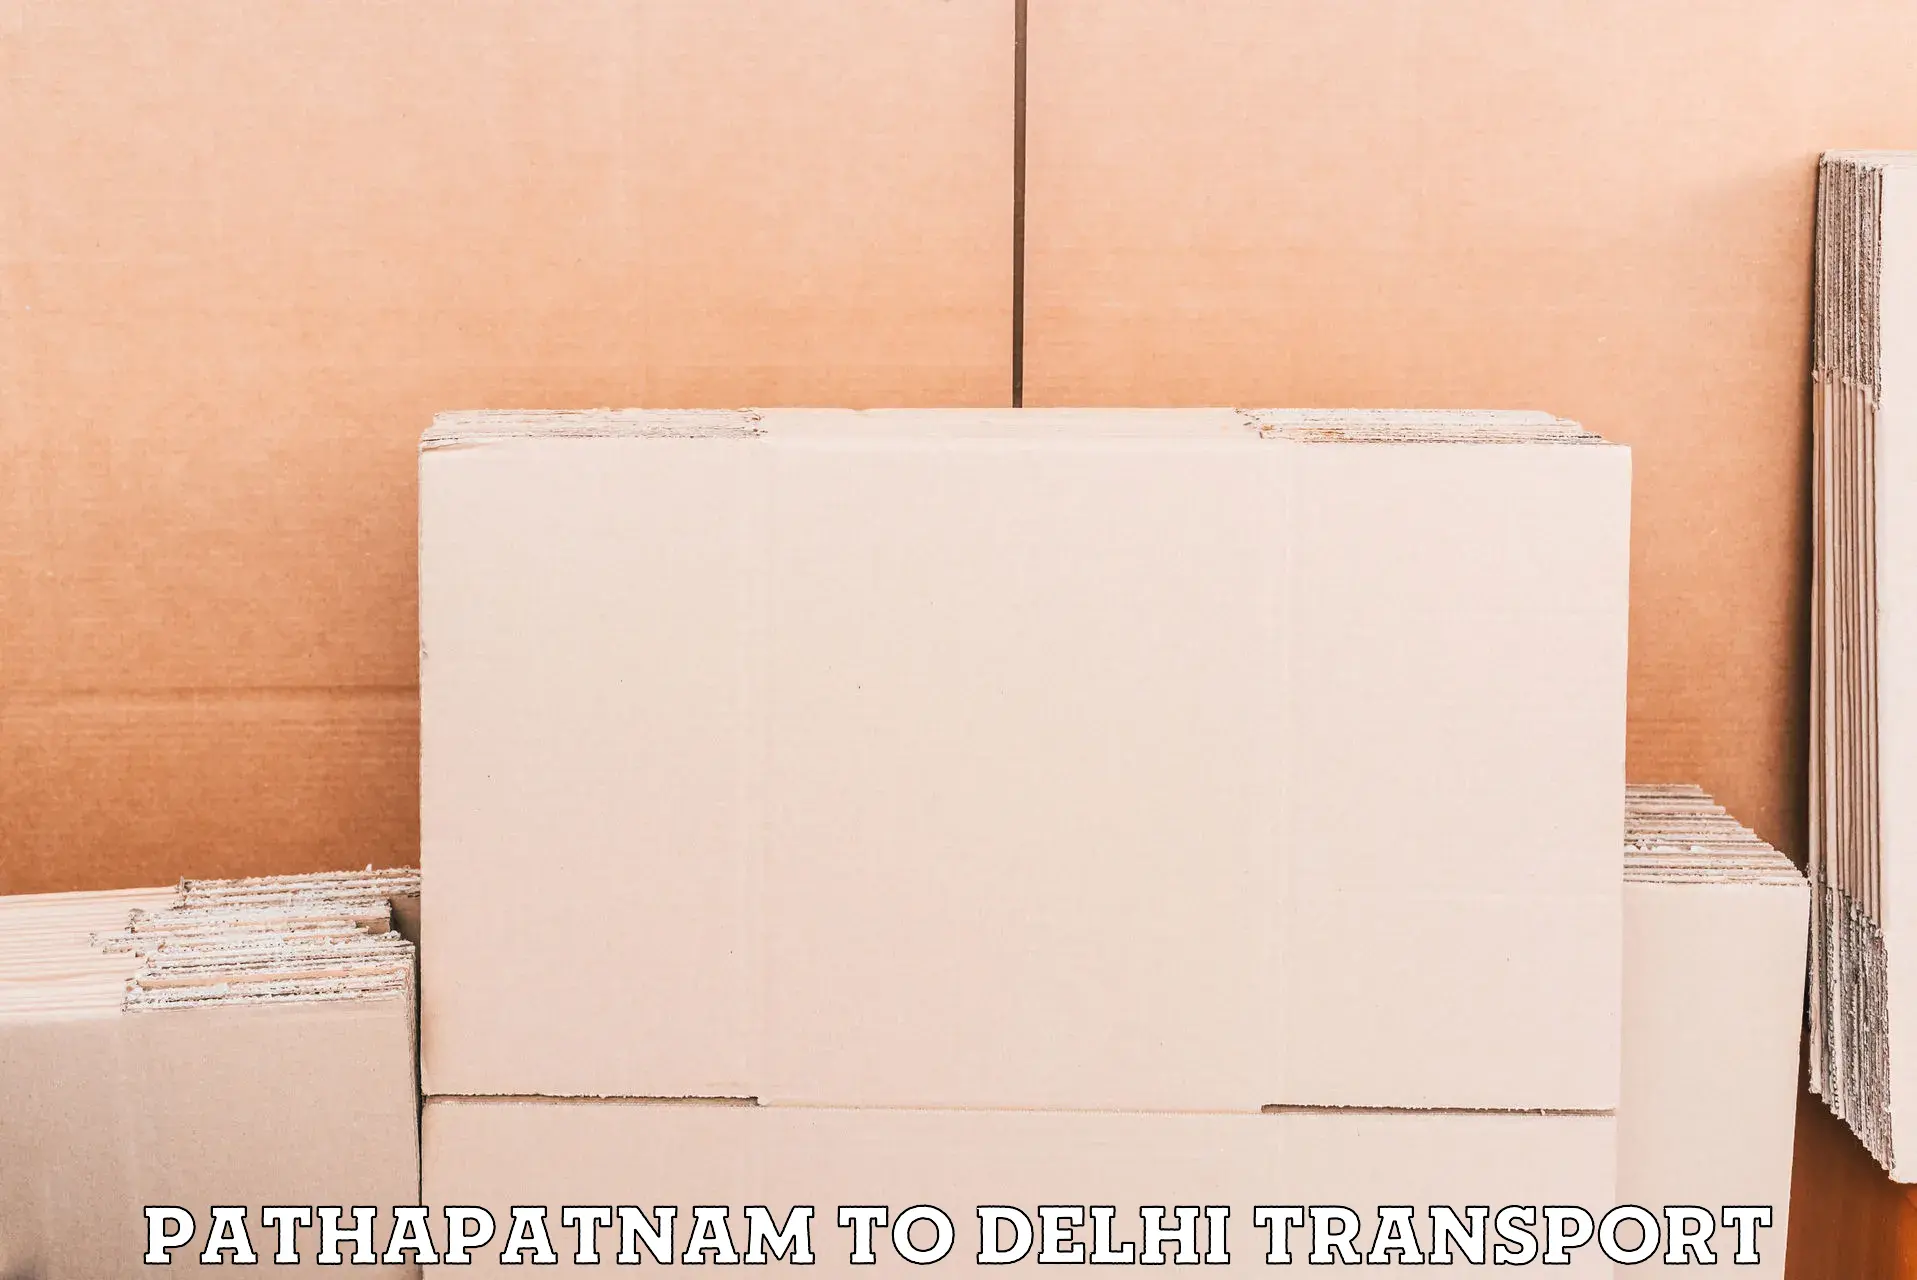 Commercial transport service Pathapatnam to Delhi